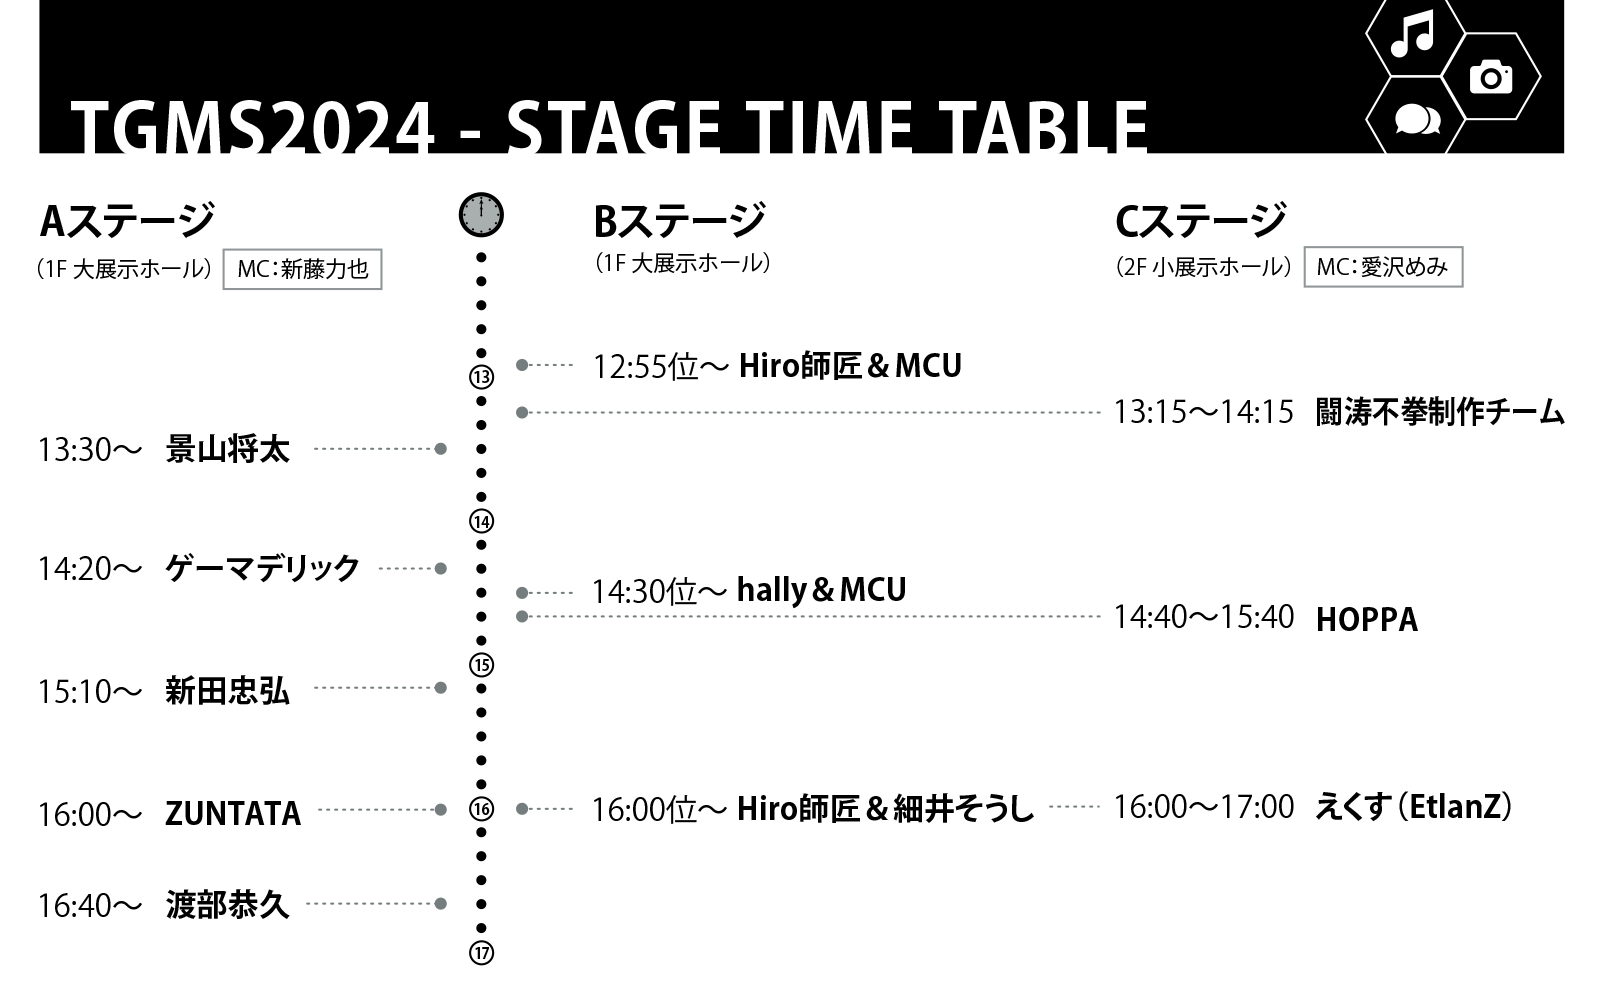 TGMS2024 - STAGE TIME TABLE